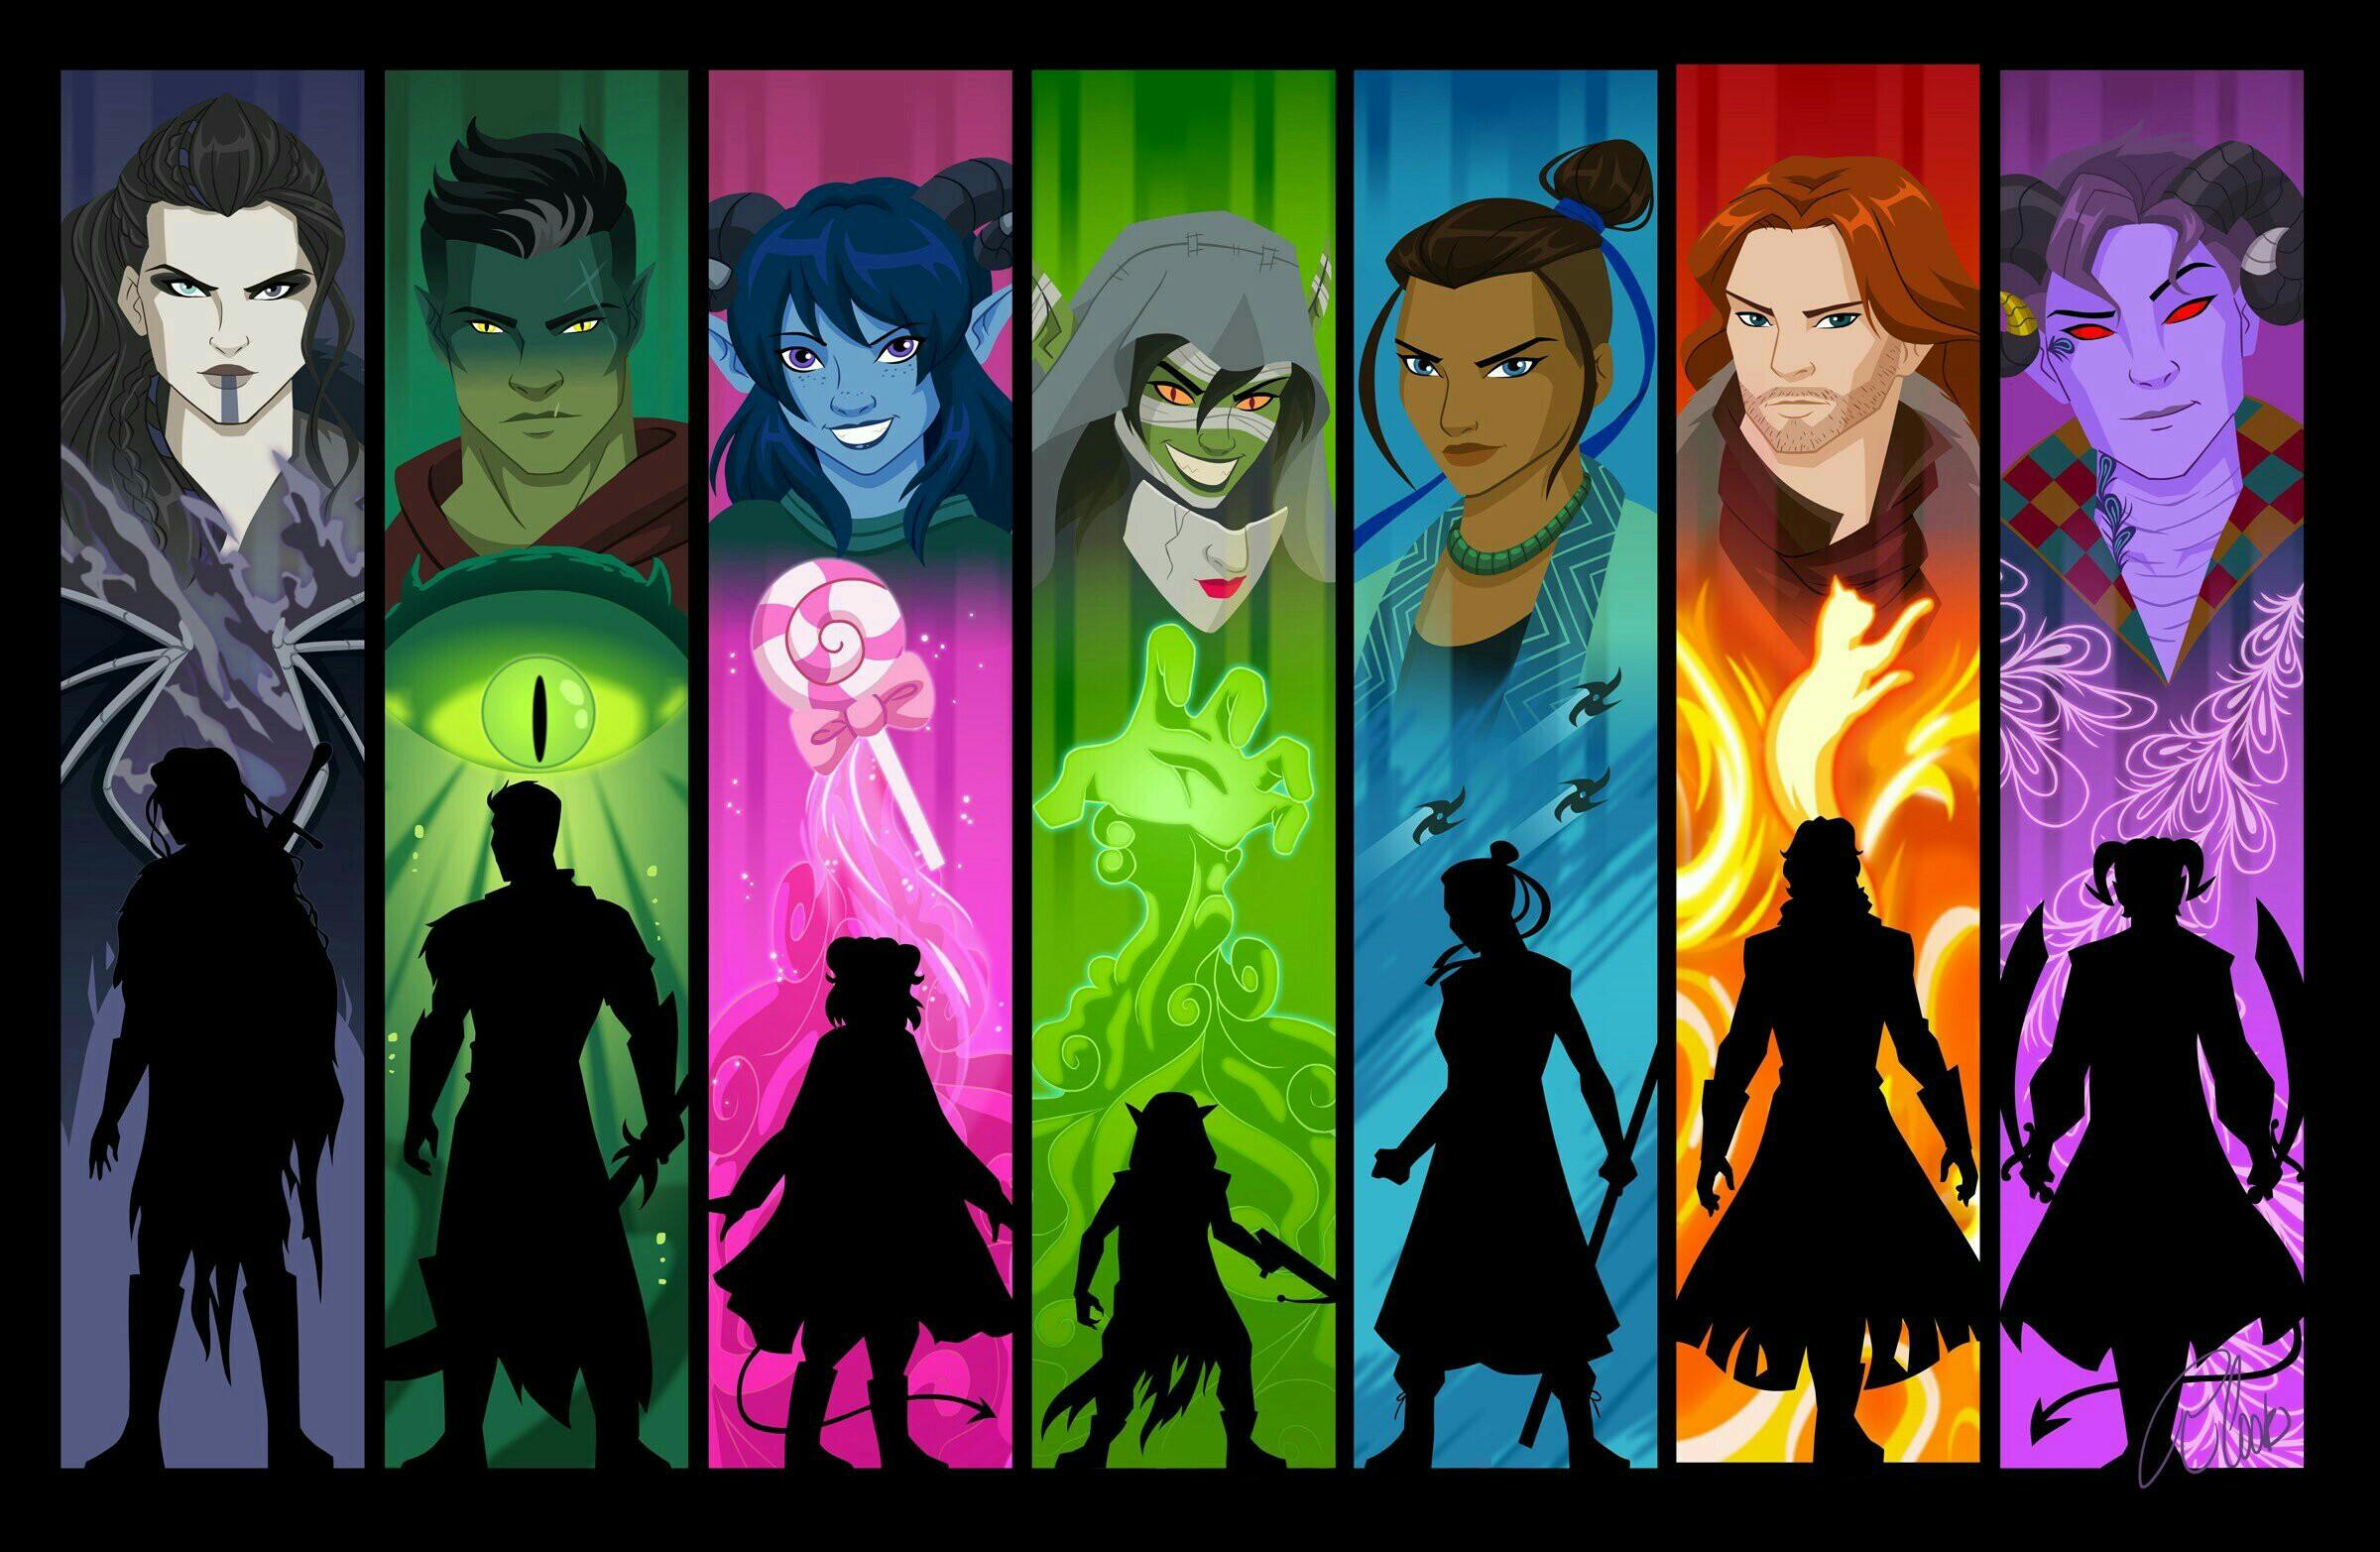 critical role wallpapers wallpaper cave critical role wallpapers wallpaper cave